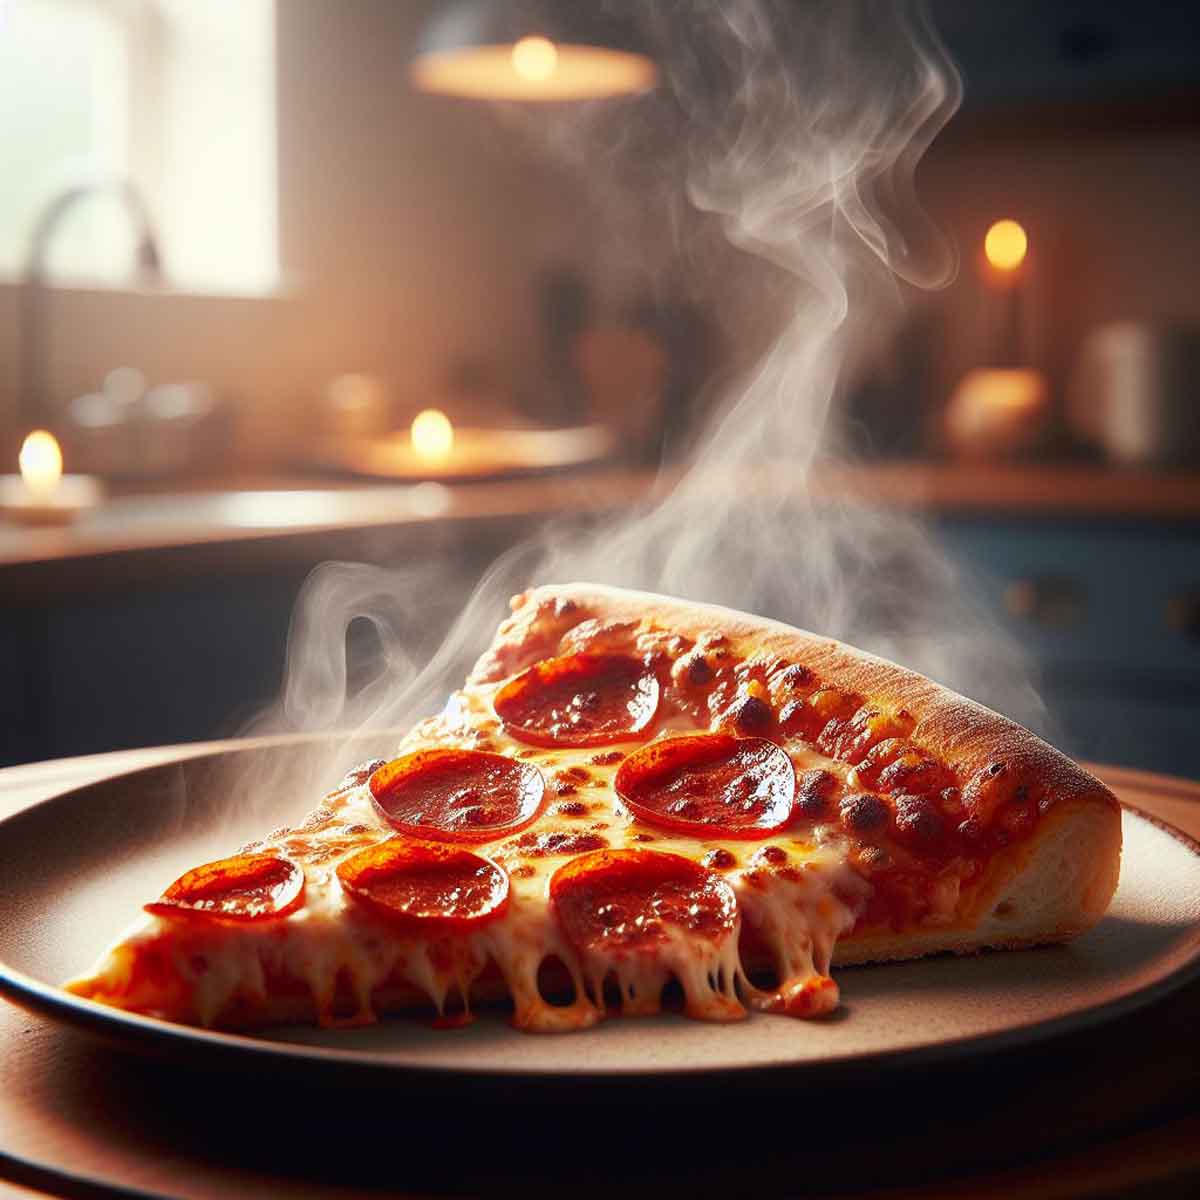 A reheated slice of Domino's pizza on a plate, showing steamy, melted cheese and a crispy crust.